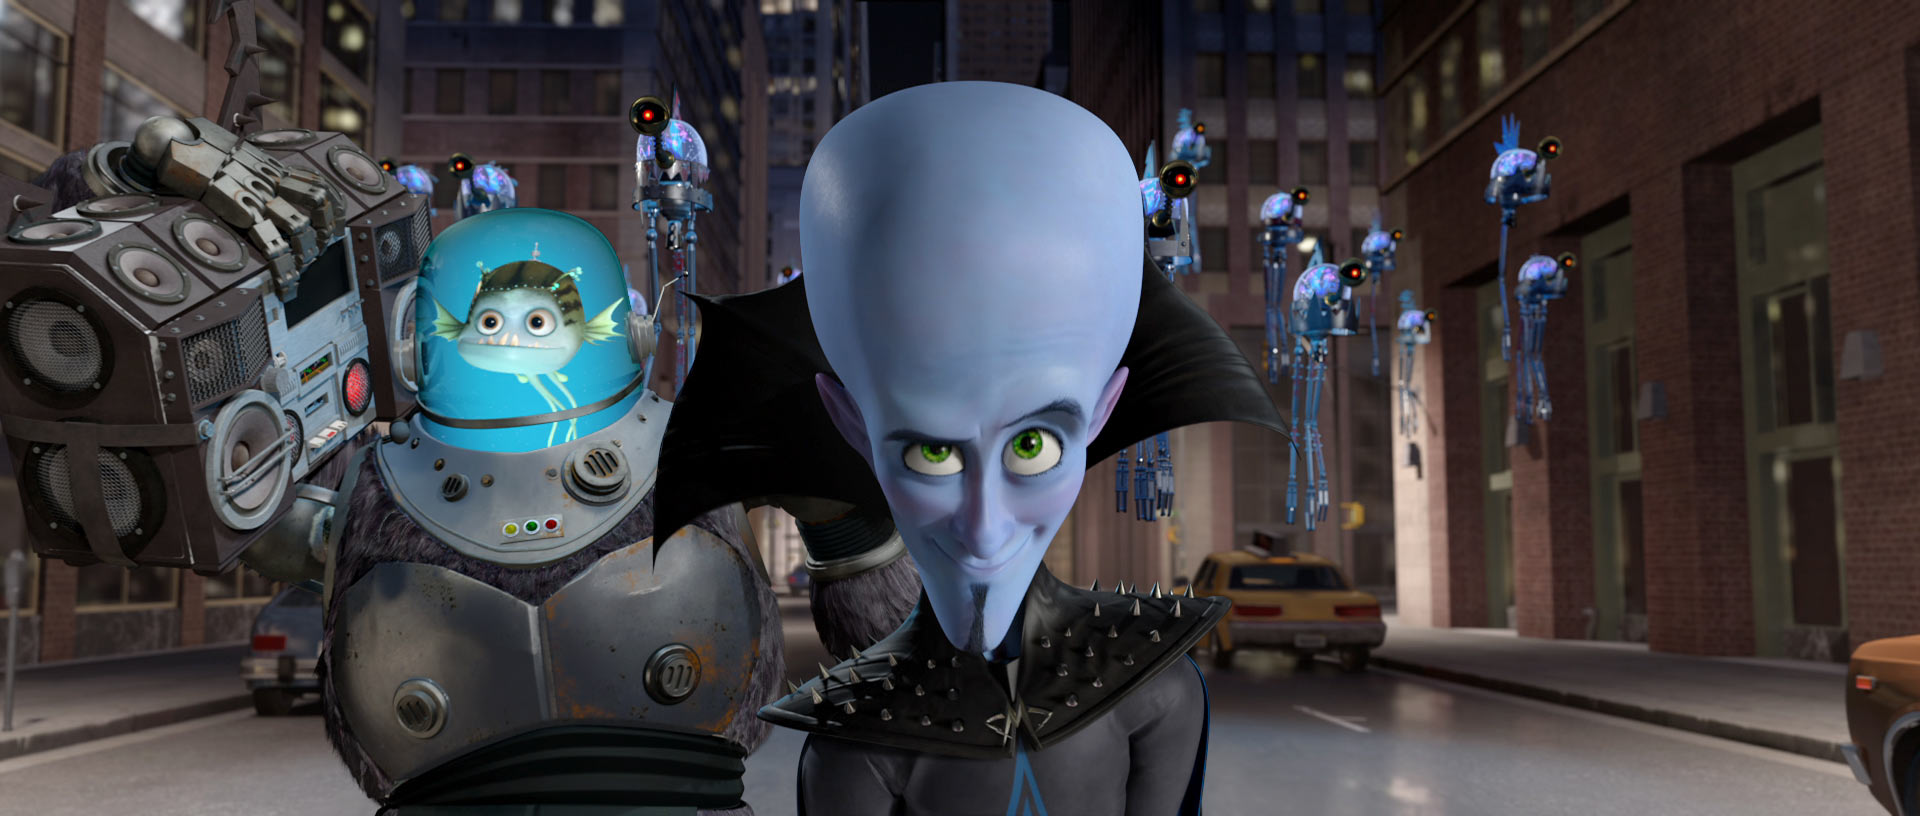 Megamind And Minion Wallpaper - Megamind And Minion , HD Wallpaper & Backgrounds